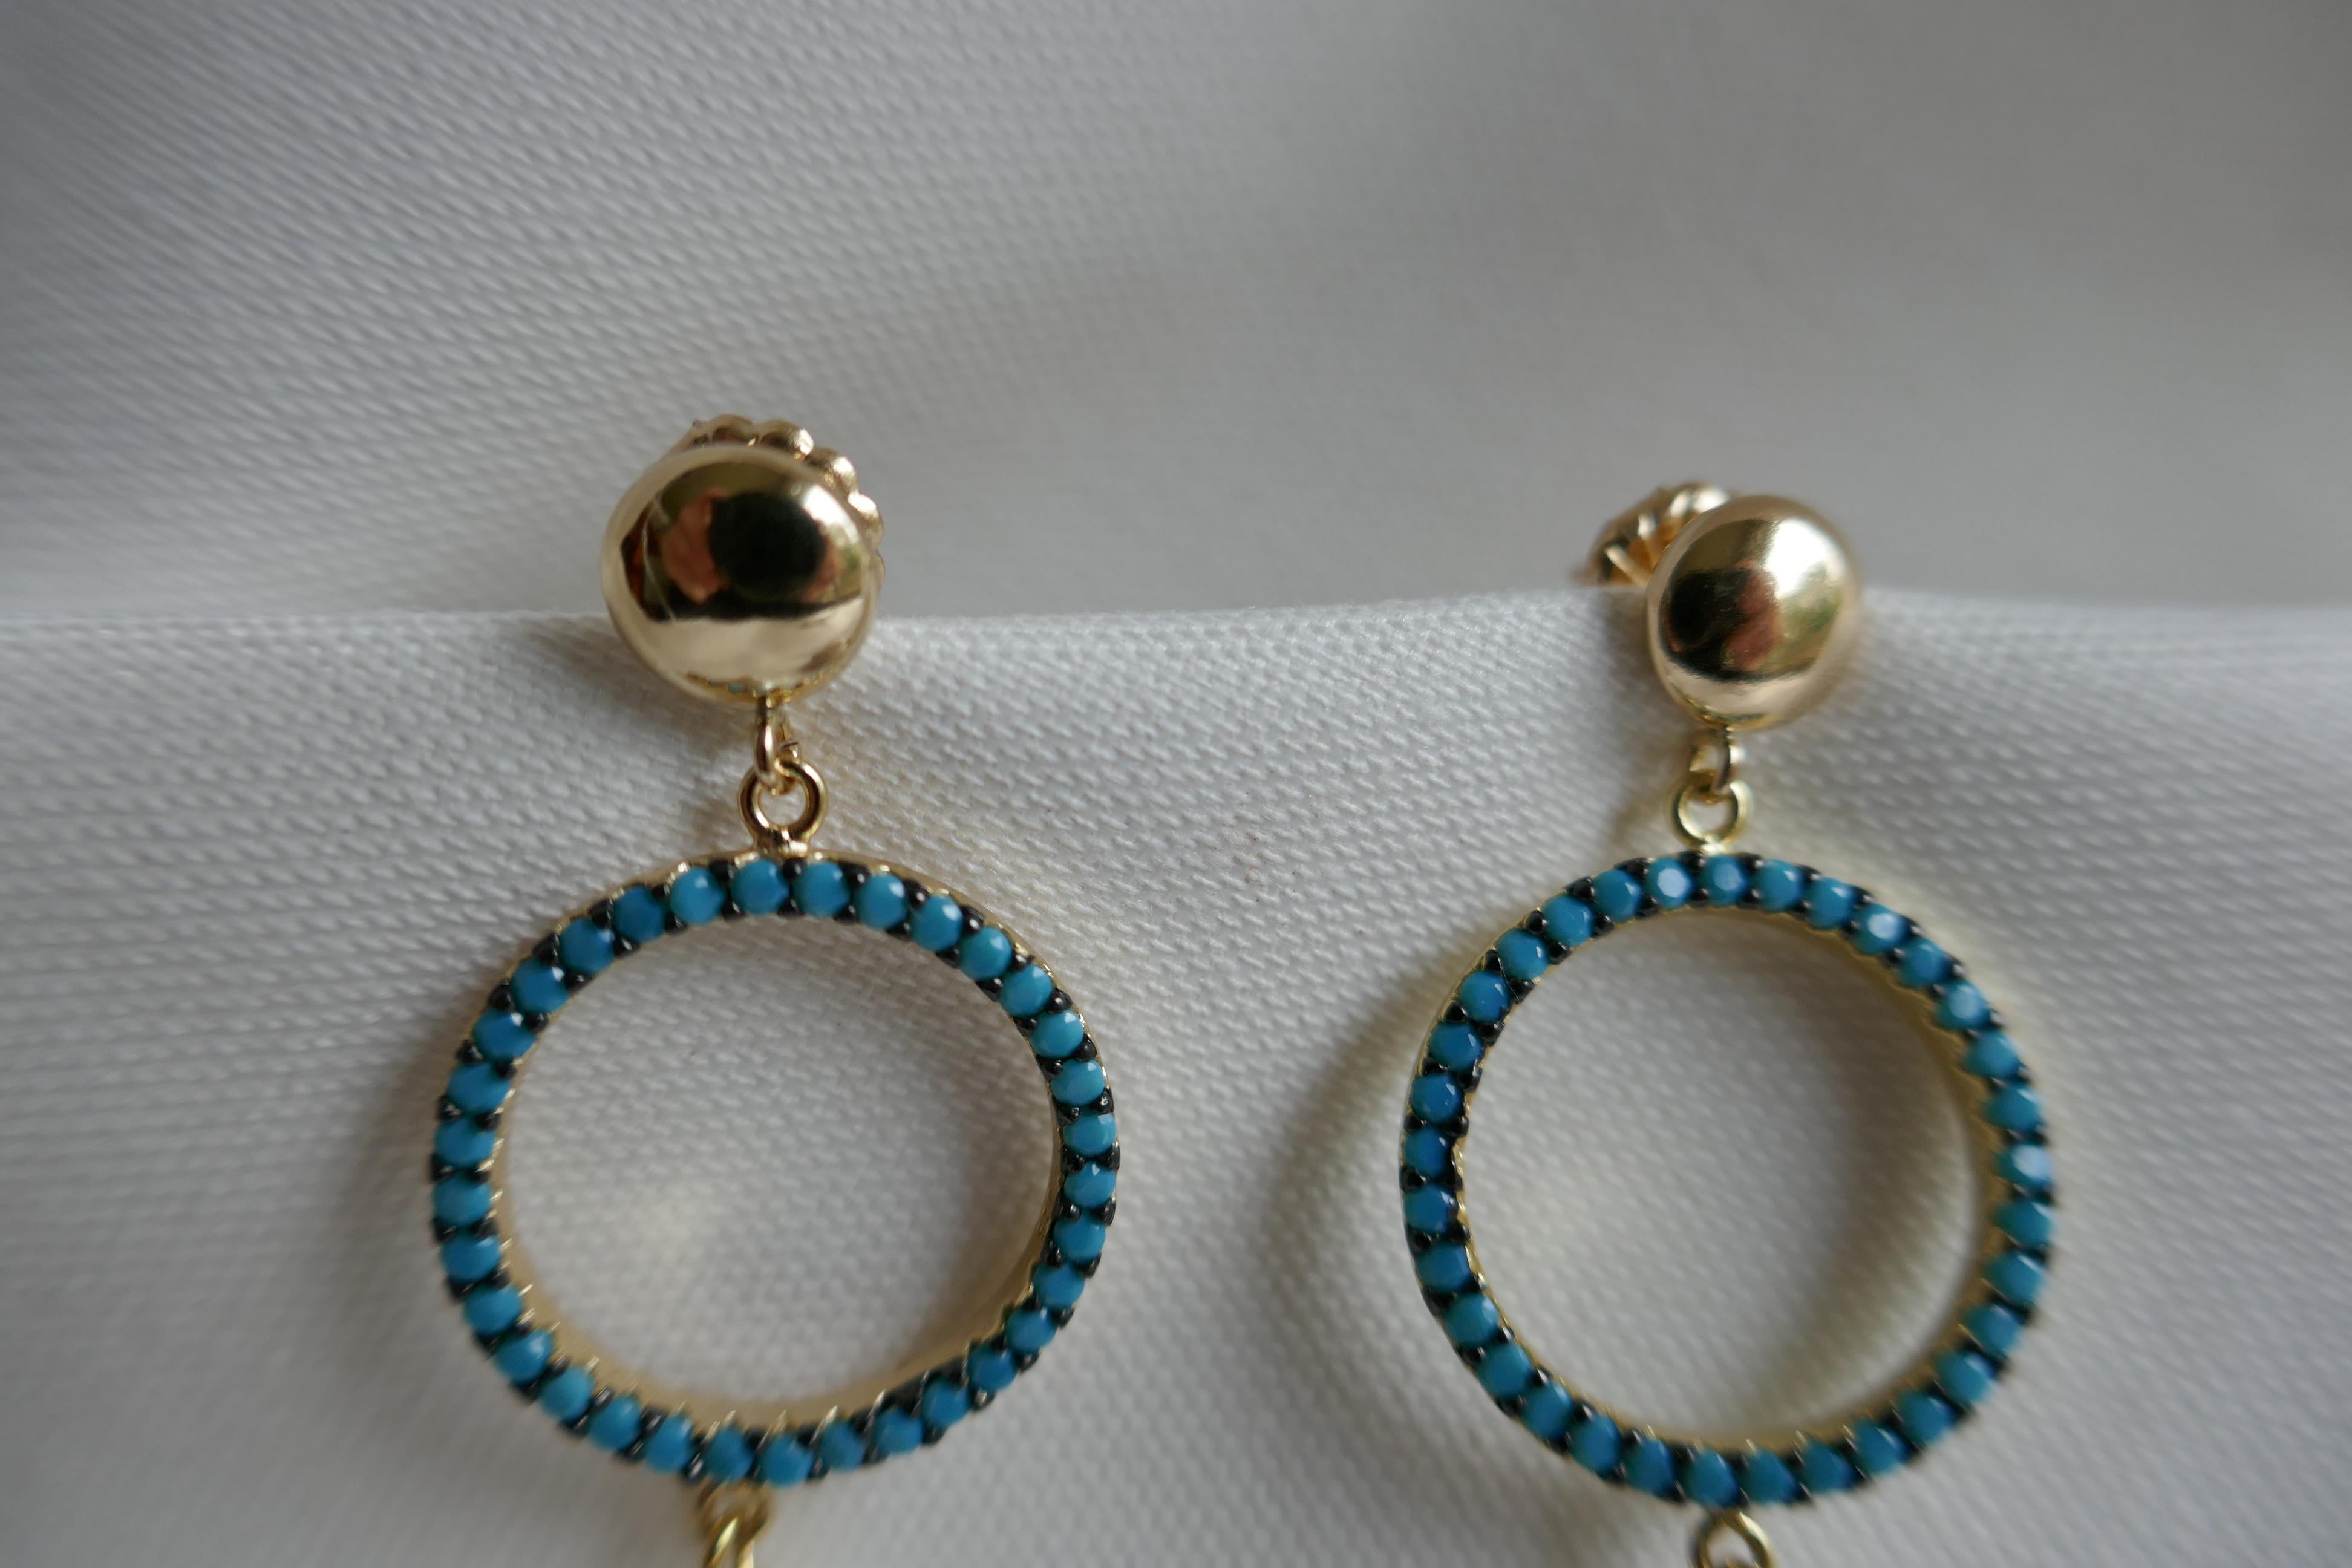 Great earrings specially for summer. The earrings have large white cultured coin pearls 19mm that hang from a turquoise 925 sterling silver vermeil bead. Attached to 14k gold filled 7mm post.  These earrings can be dressed up or down.  The earrings